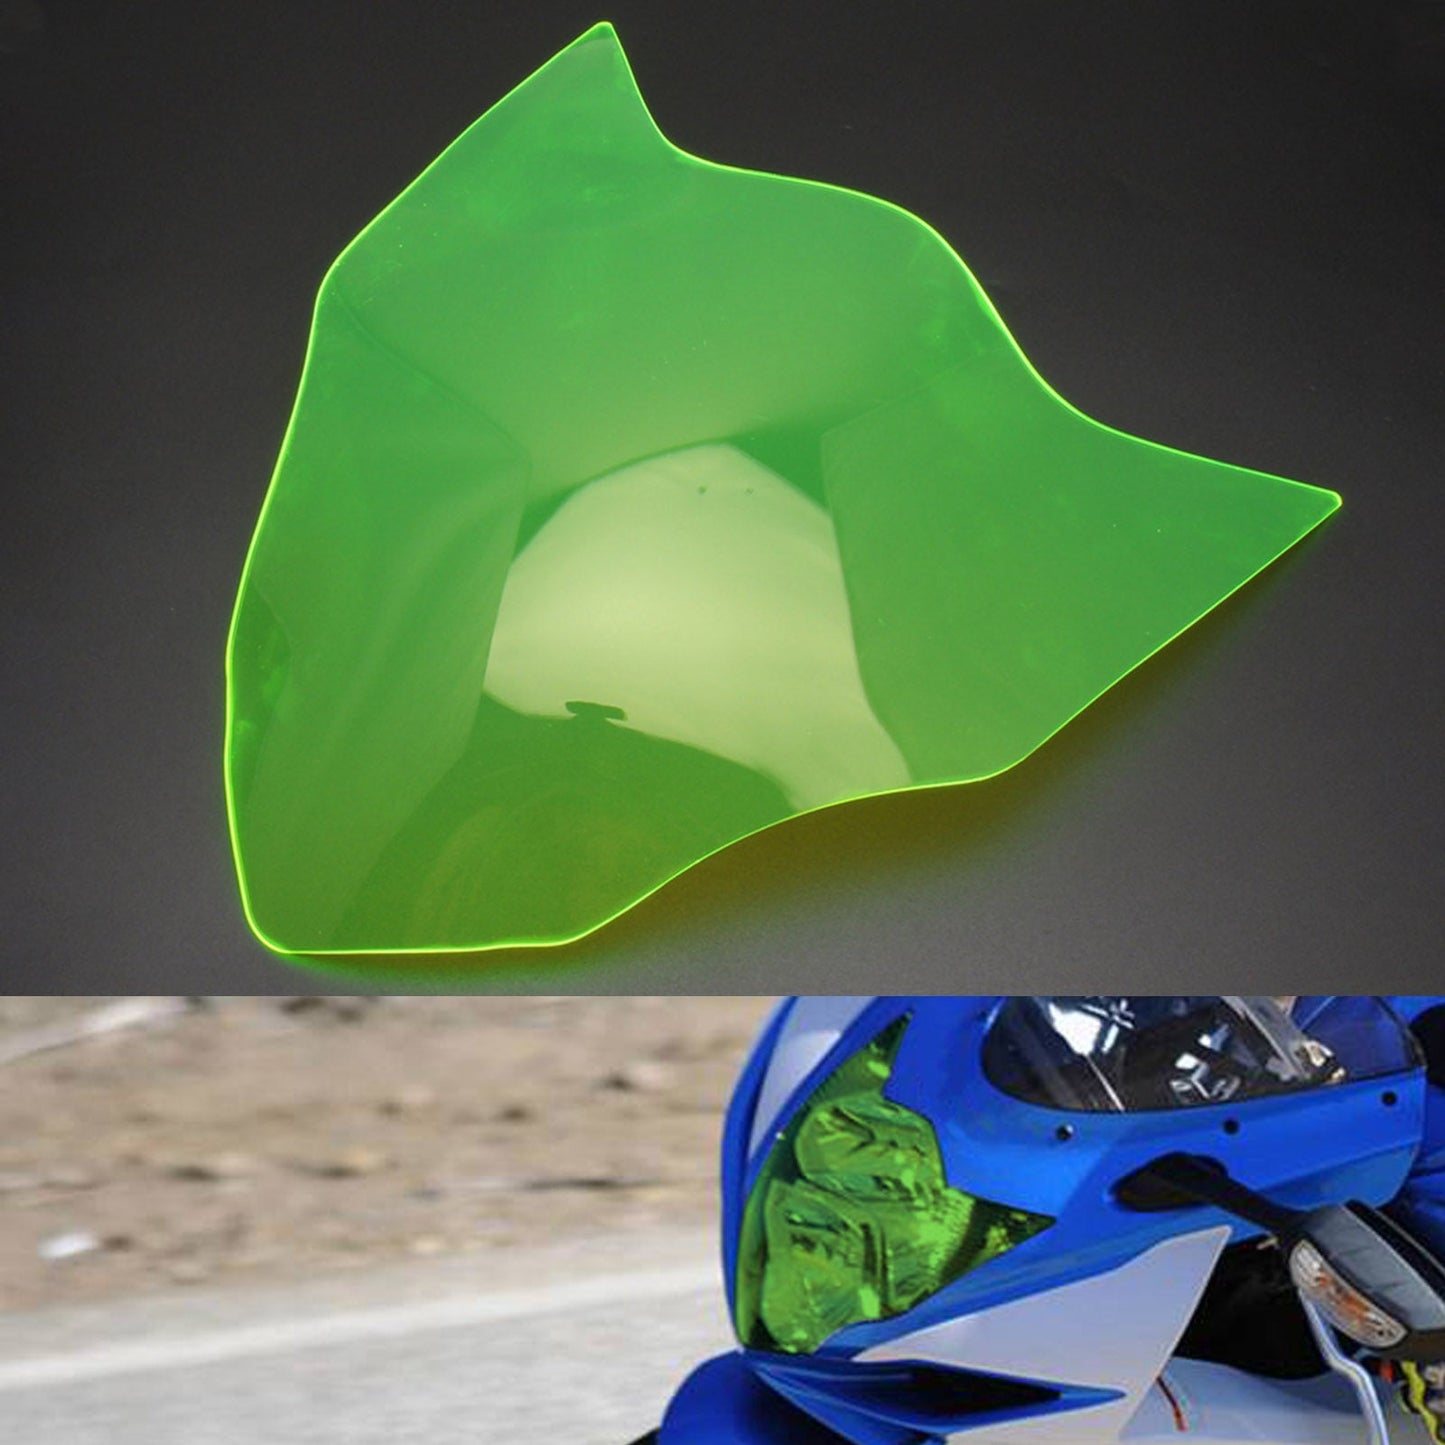 Front Headlight Lens Protection Cover Clear Fit For Suzuki Gsx-R 600 2014-2020?